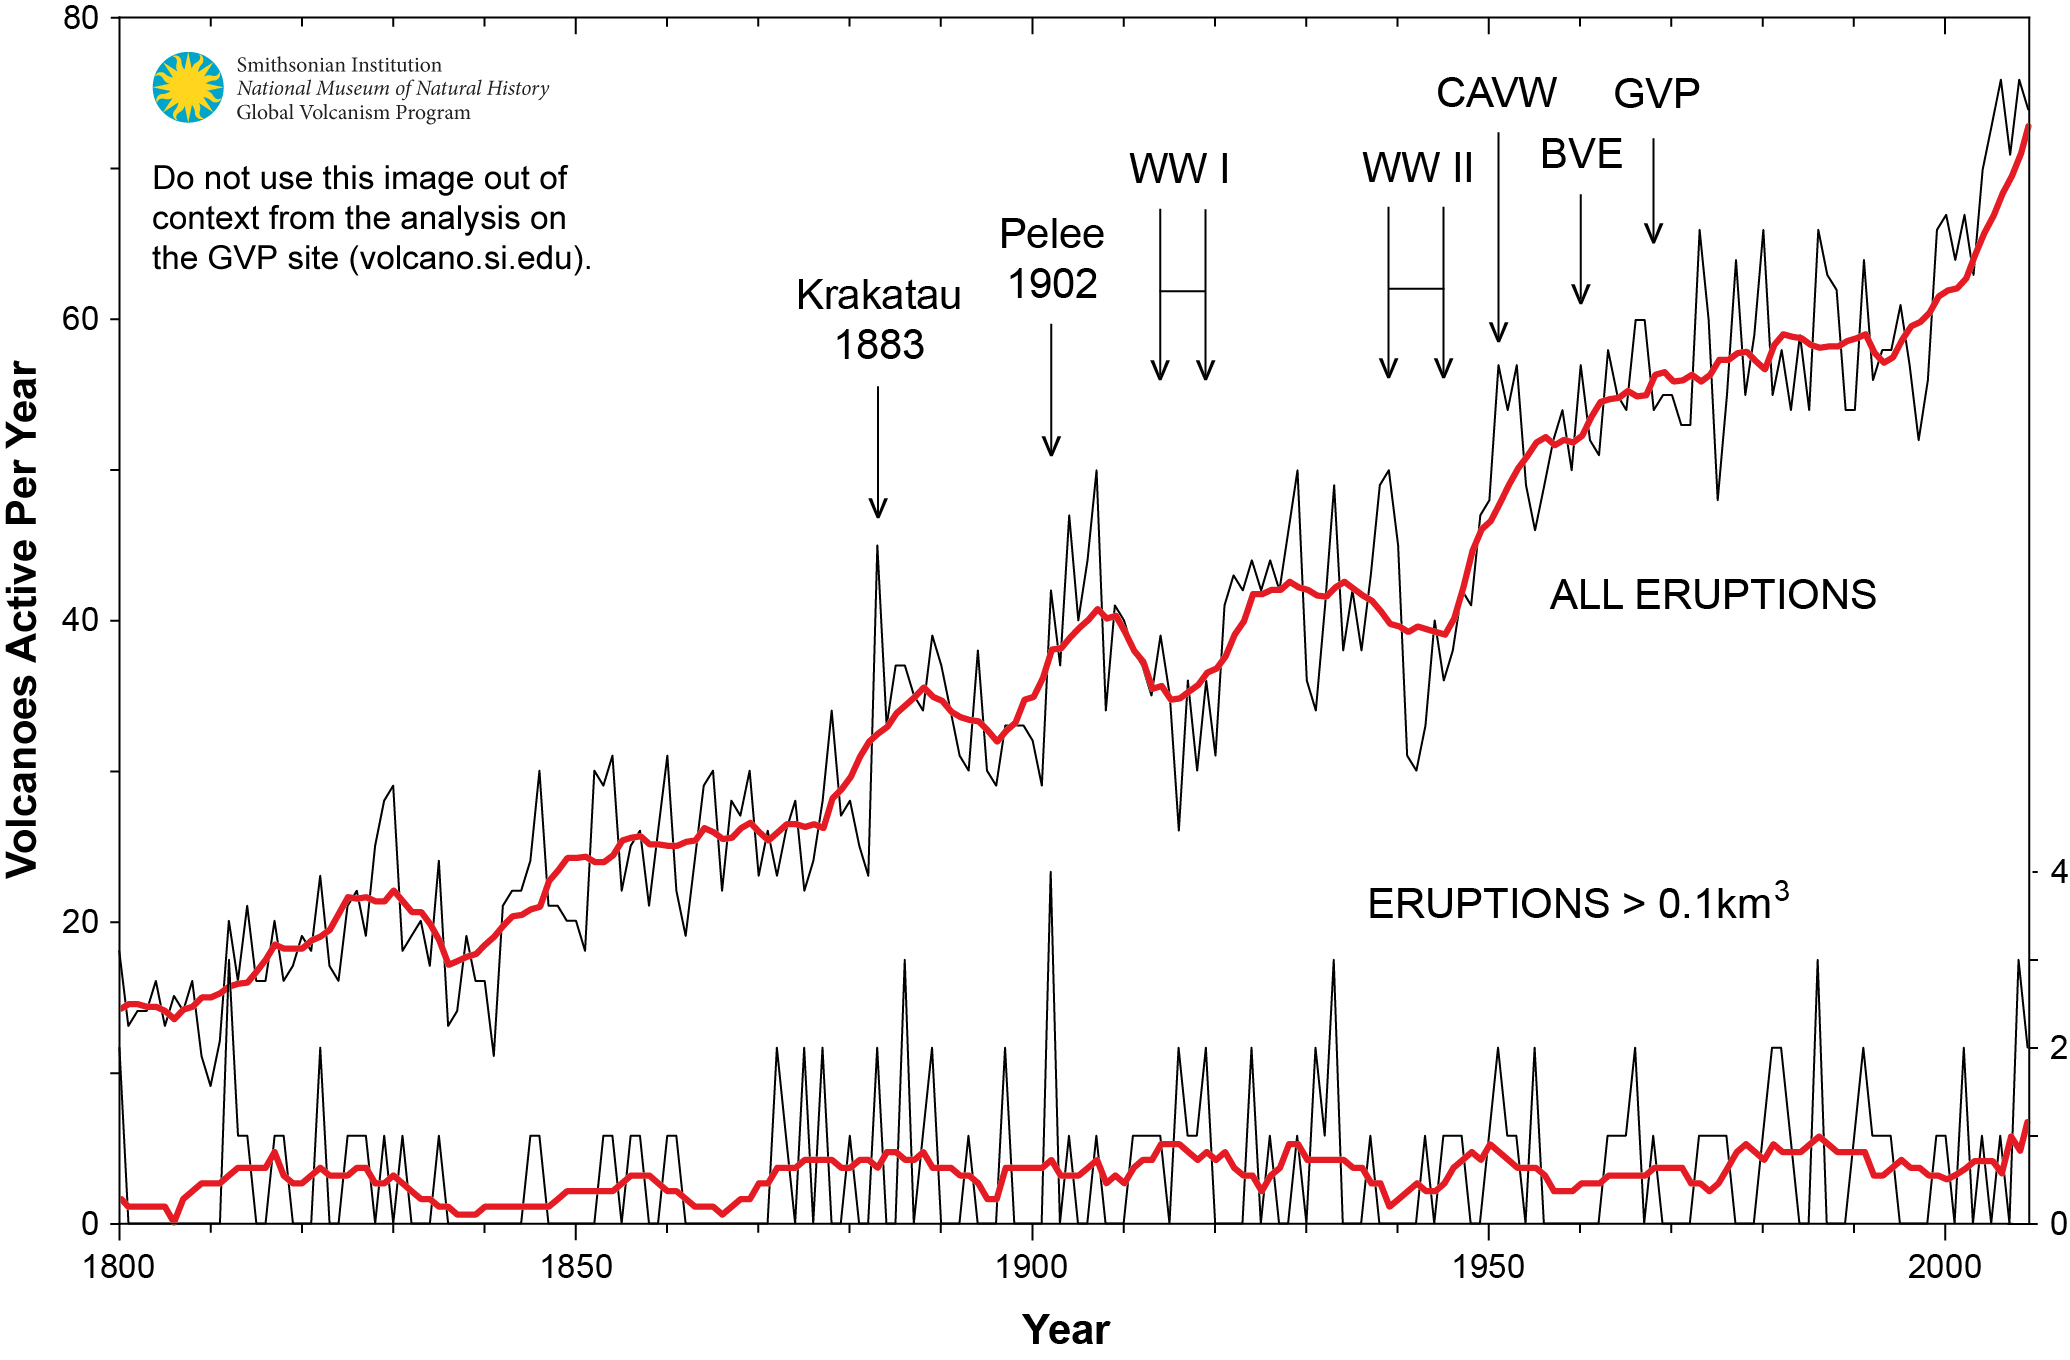 Volcanic activity over the last 200 years